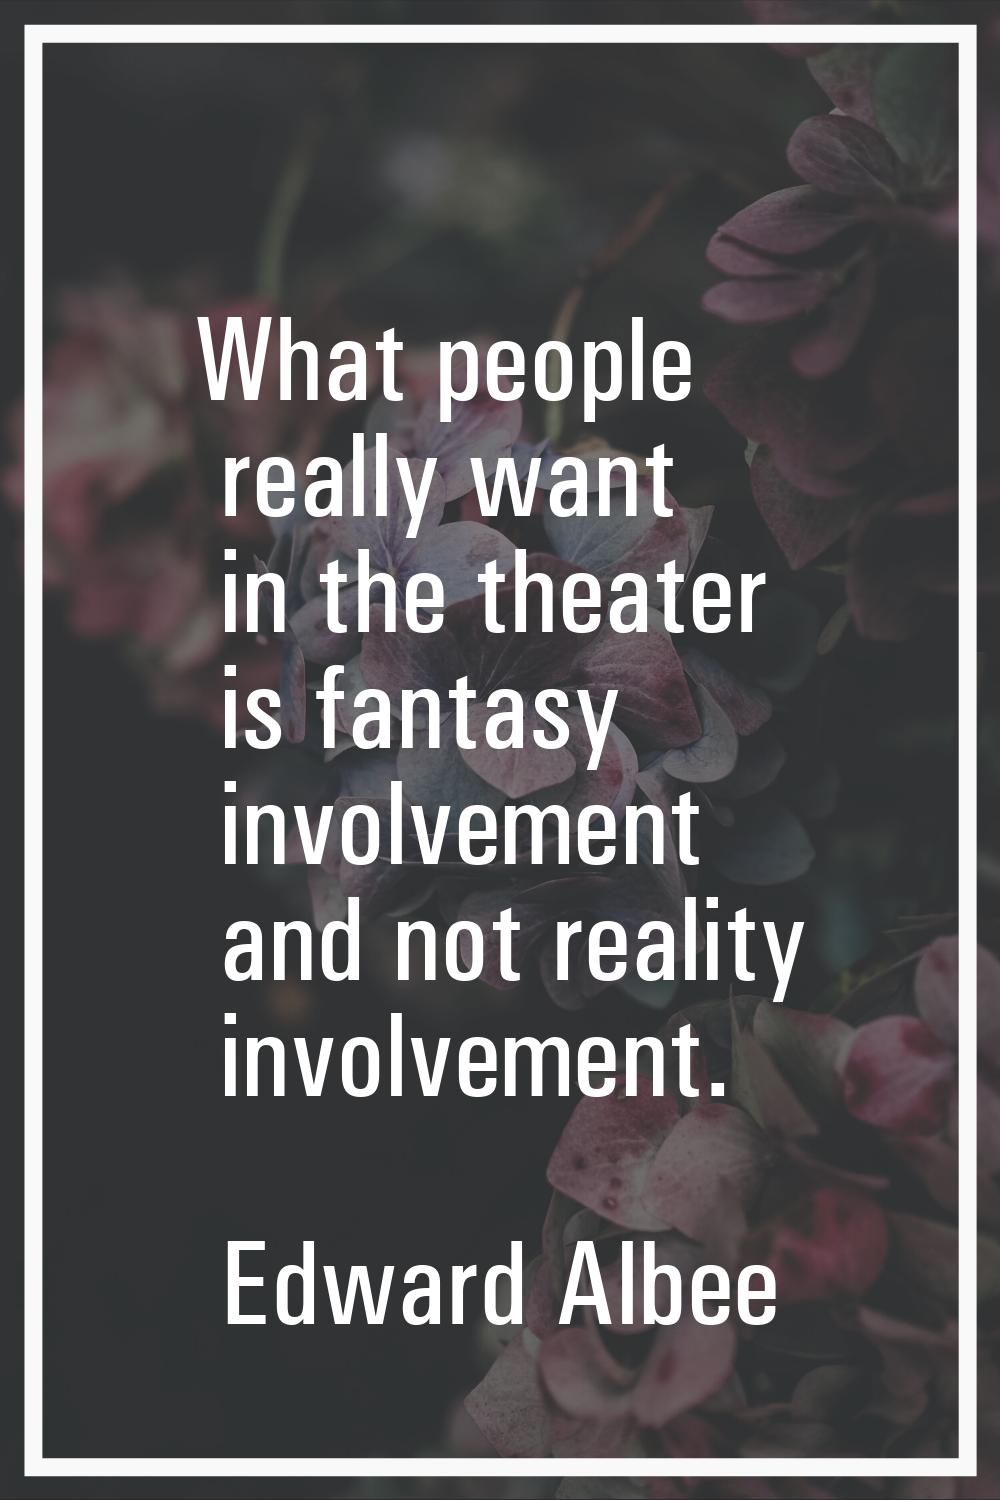 What people really want in the theater is fantasy involvement and not reality involvement.